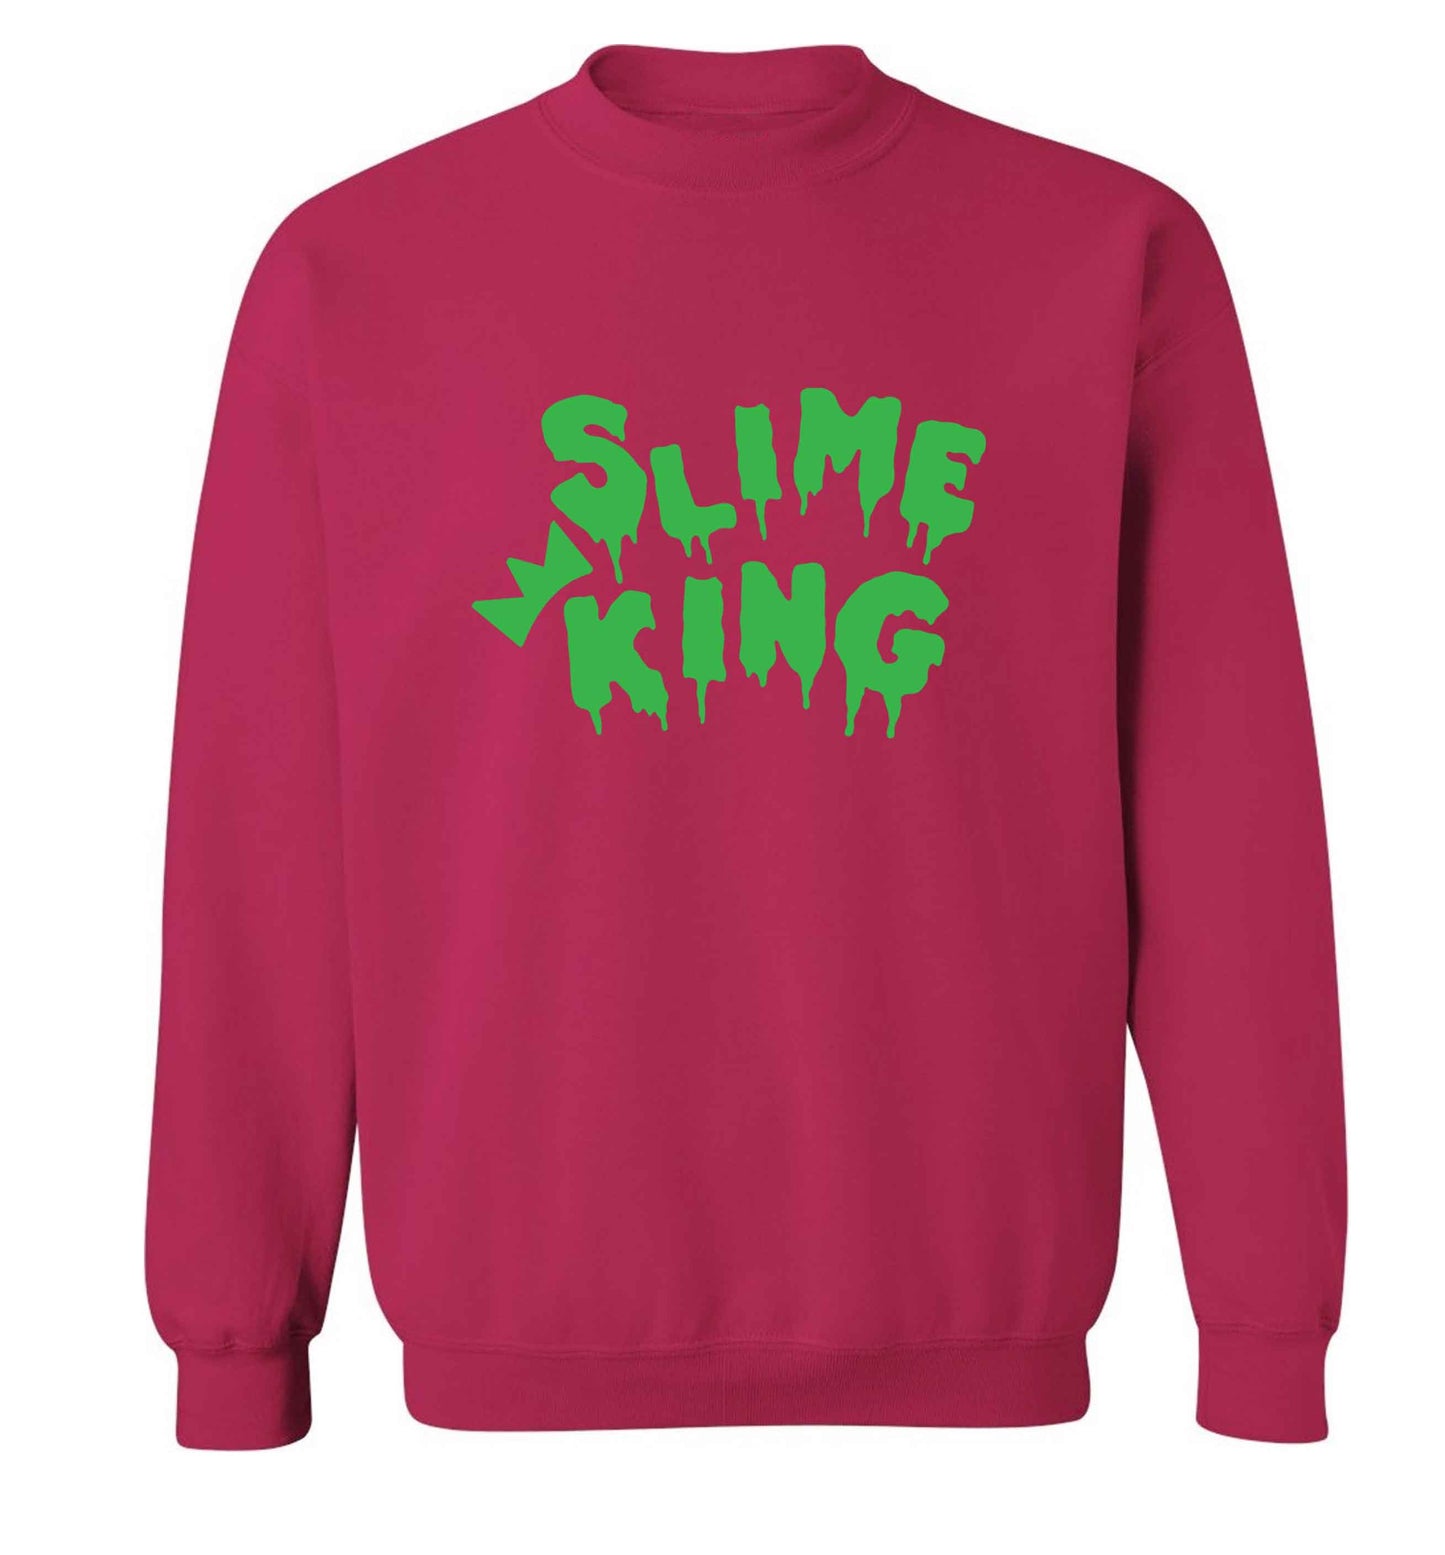 Neon green slime king adult's unisex pink sweater 2XL